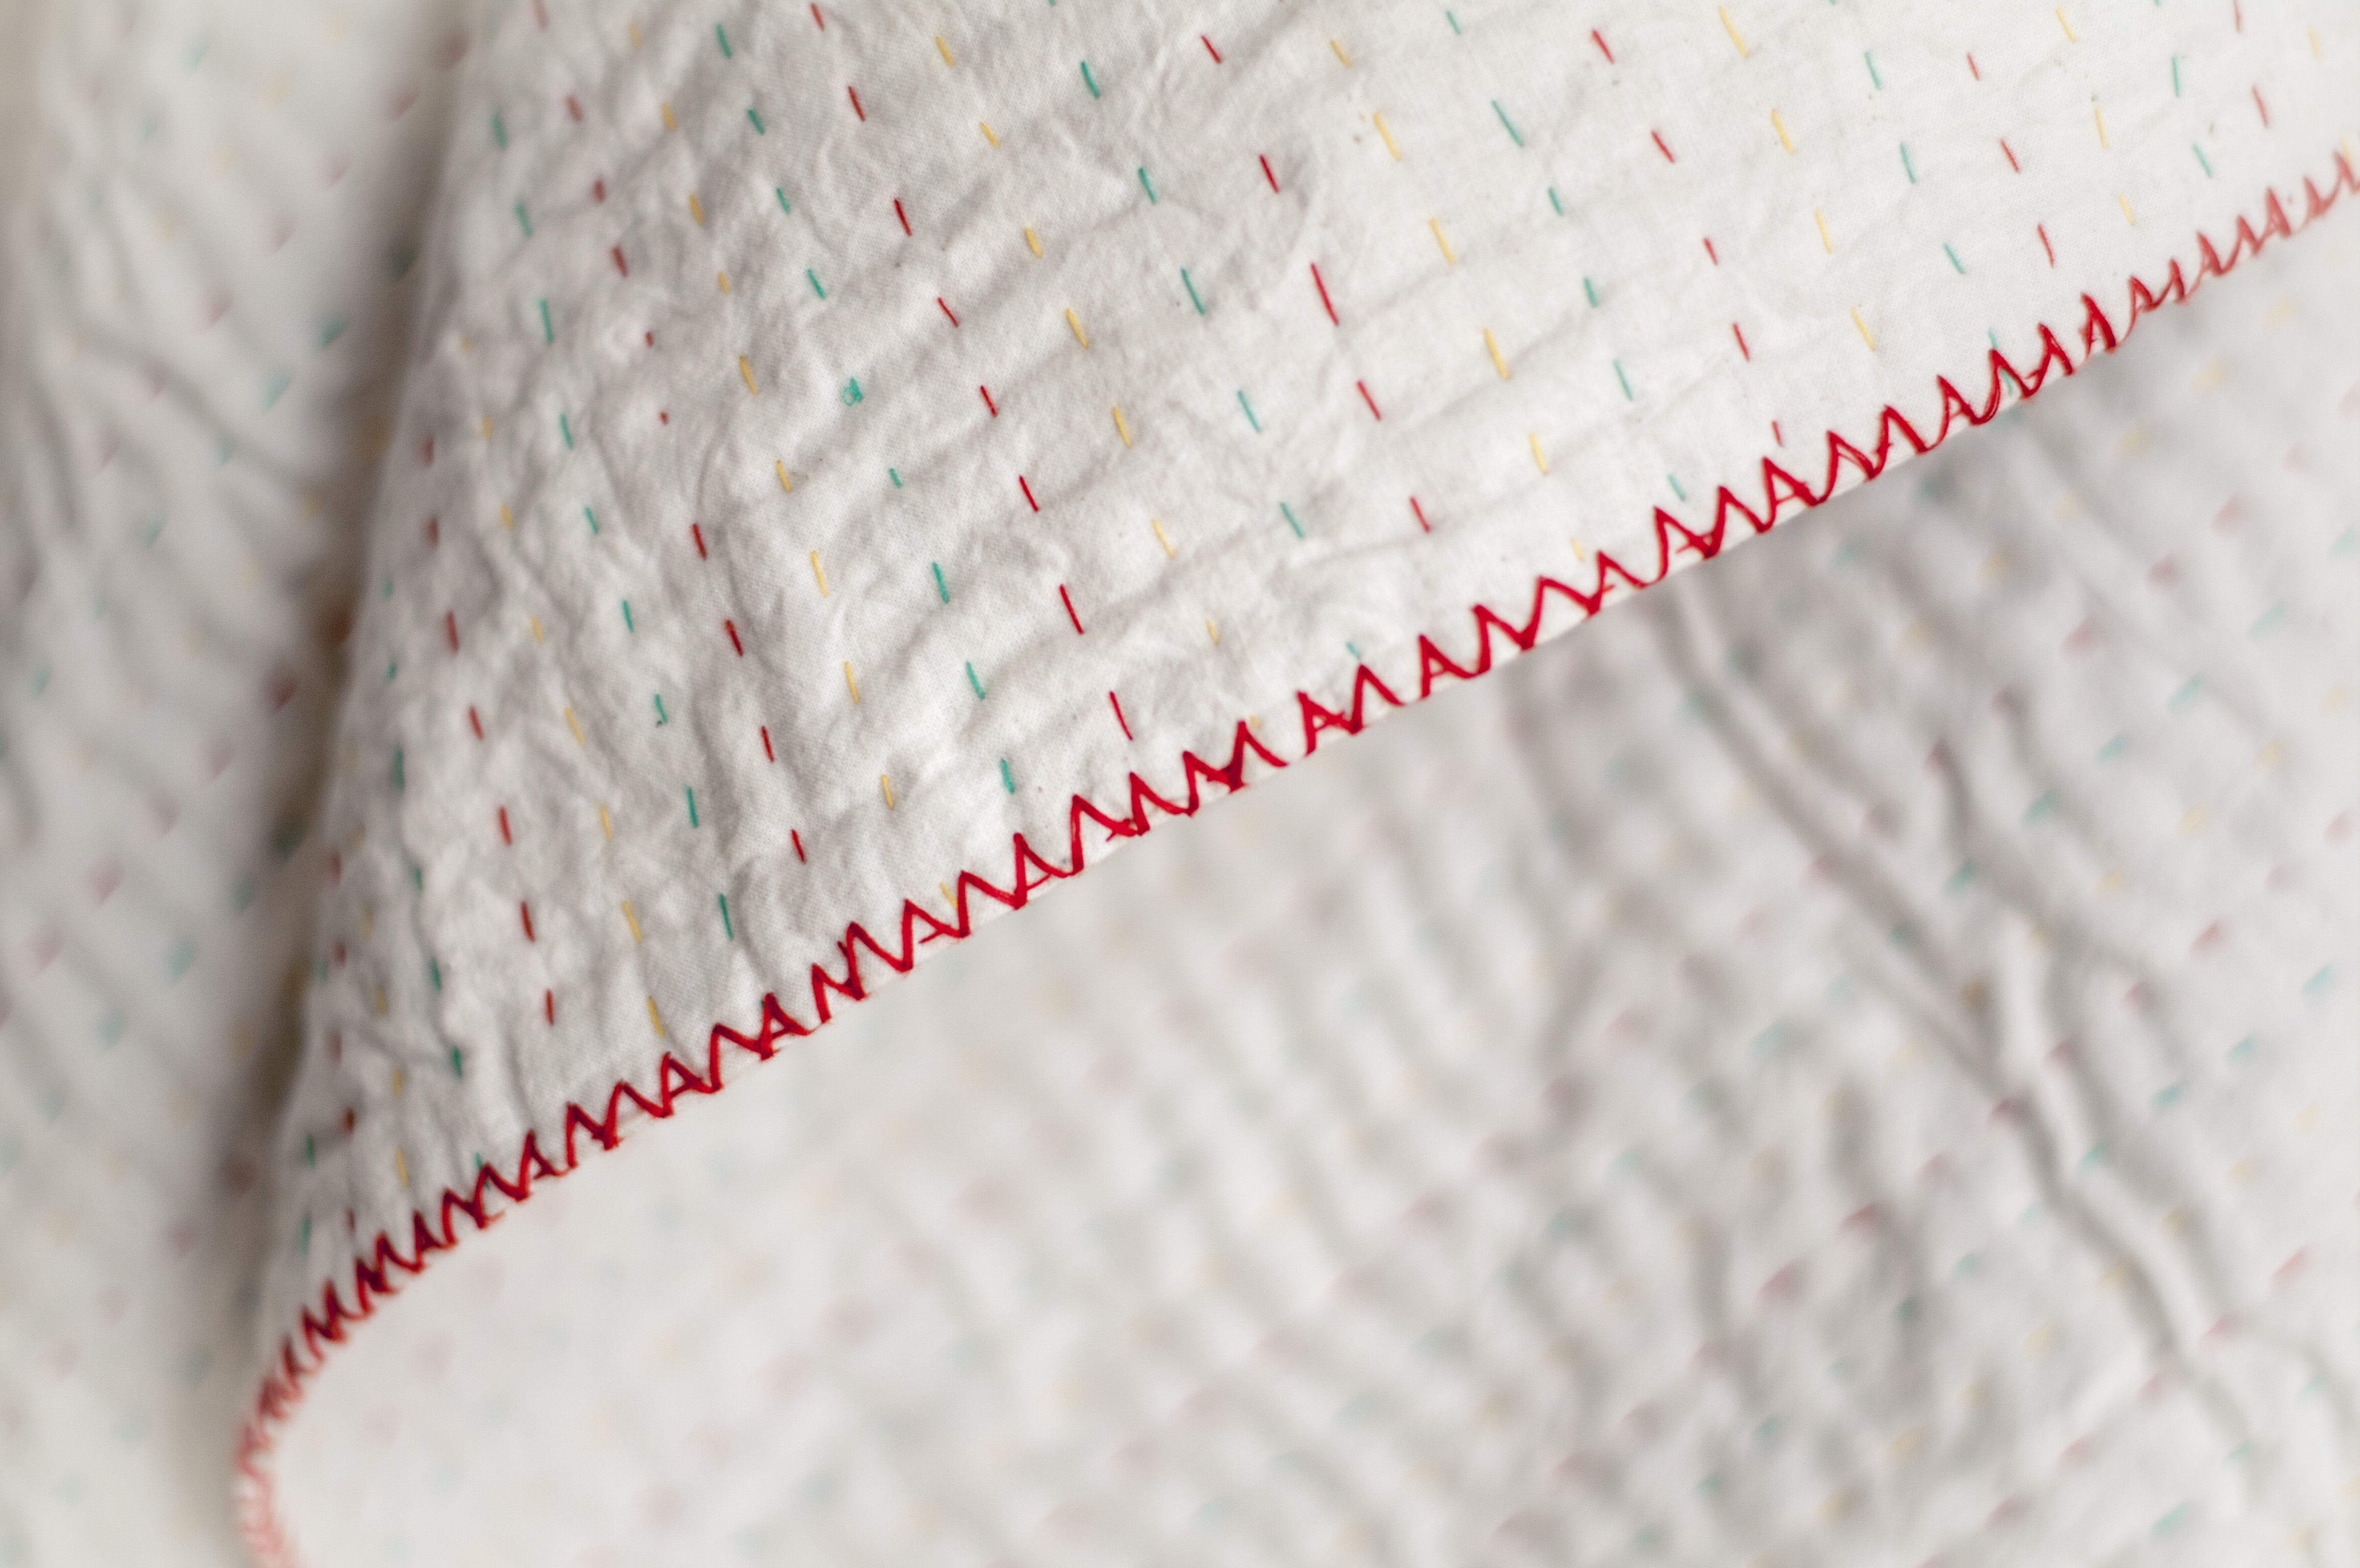 The natural throw allows the beautiful Kantha stitch to shine